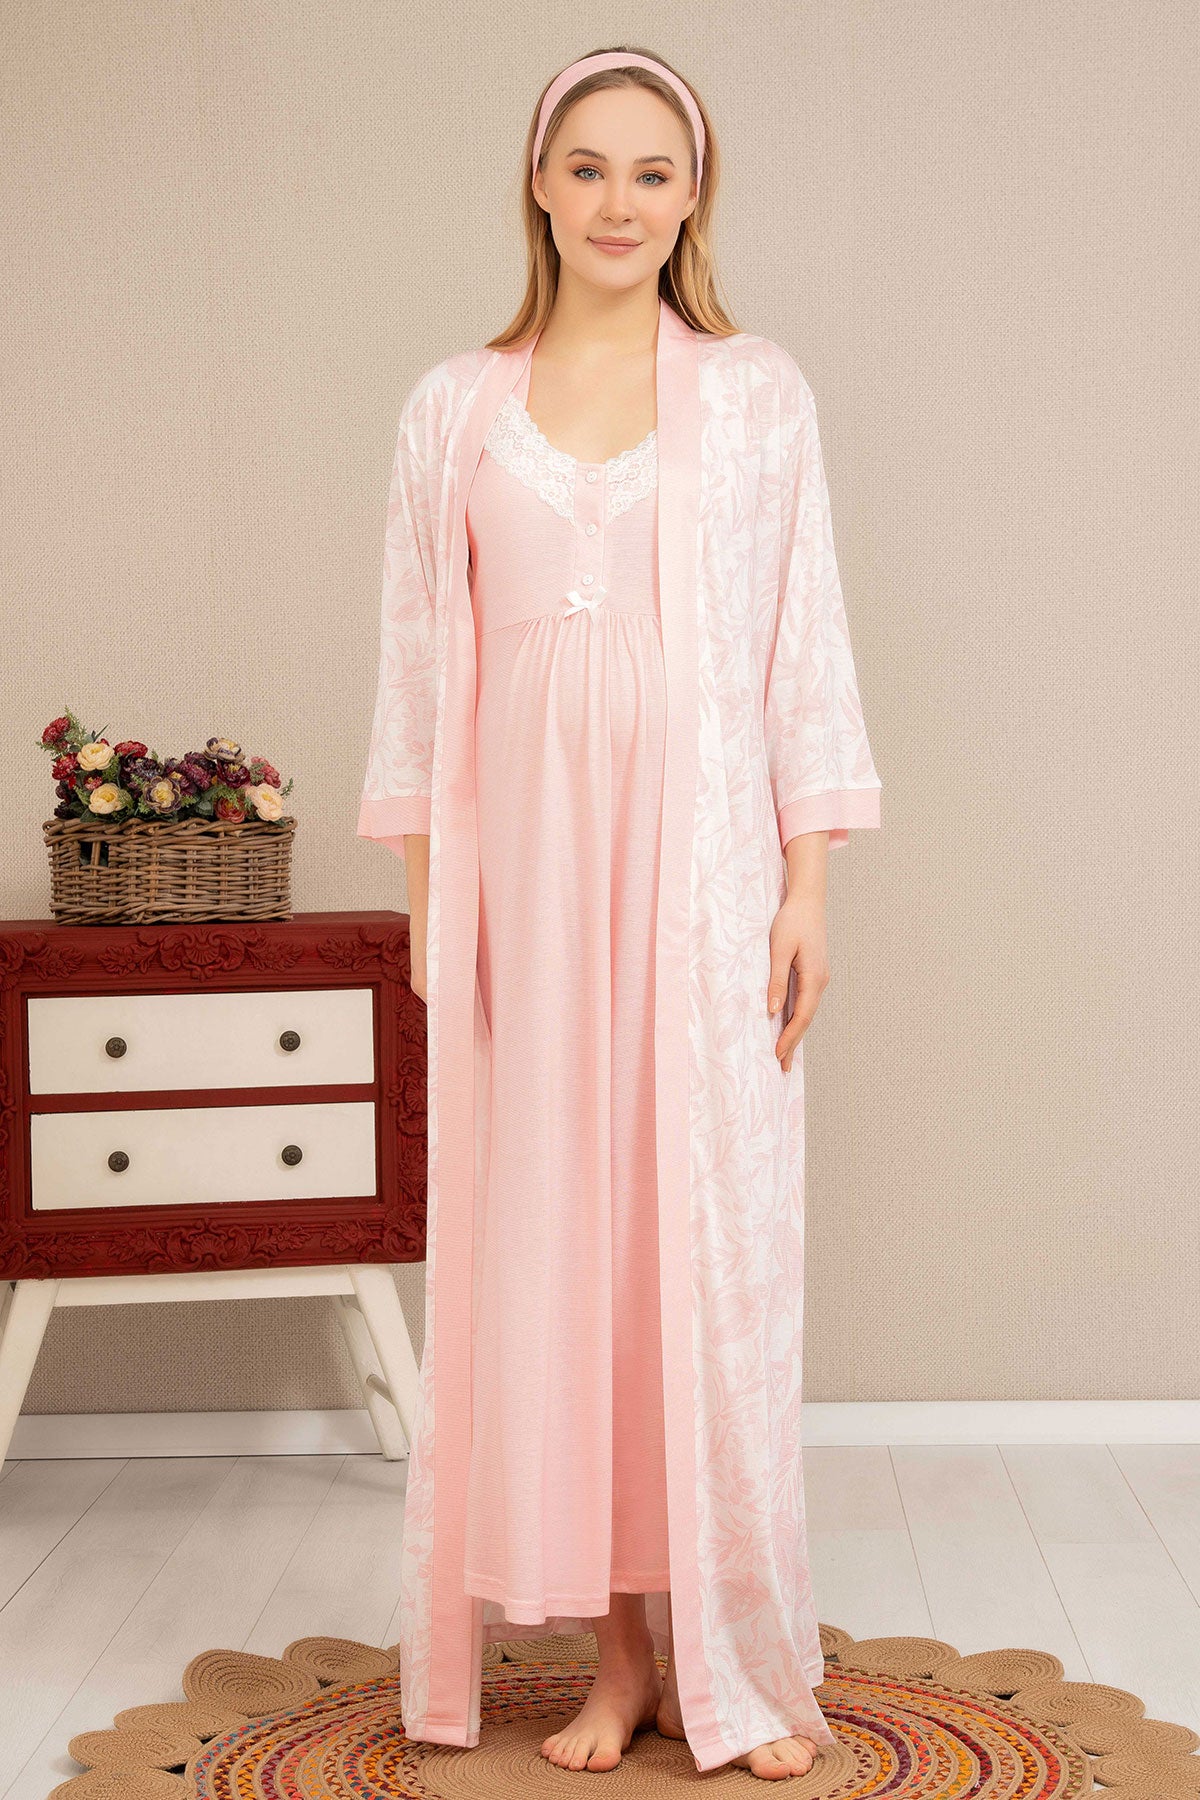 Shopymommy 4518 Lace Collar Maternity & Nursing Nightgown With Patterned Robe Pink